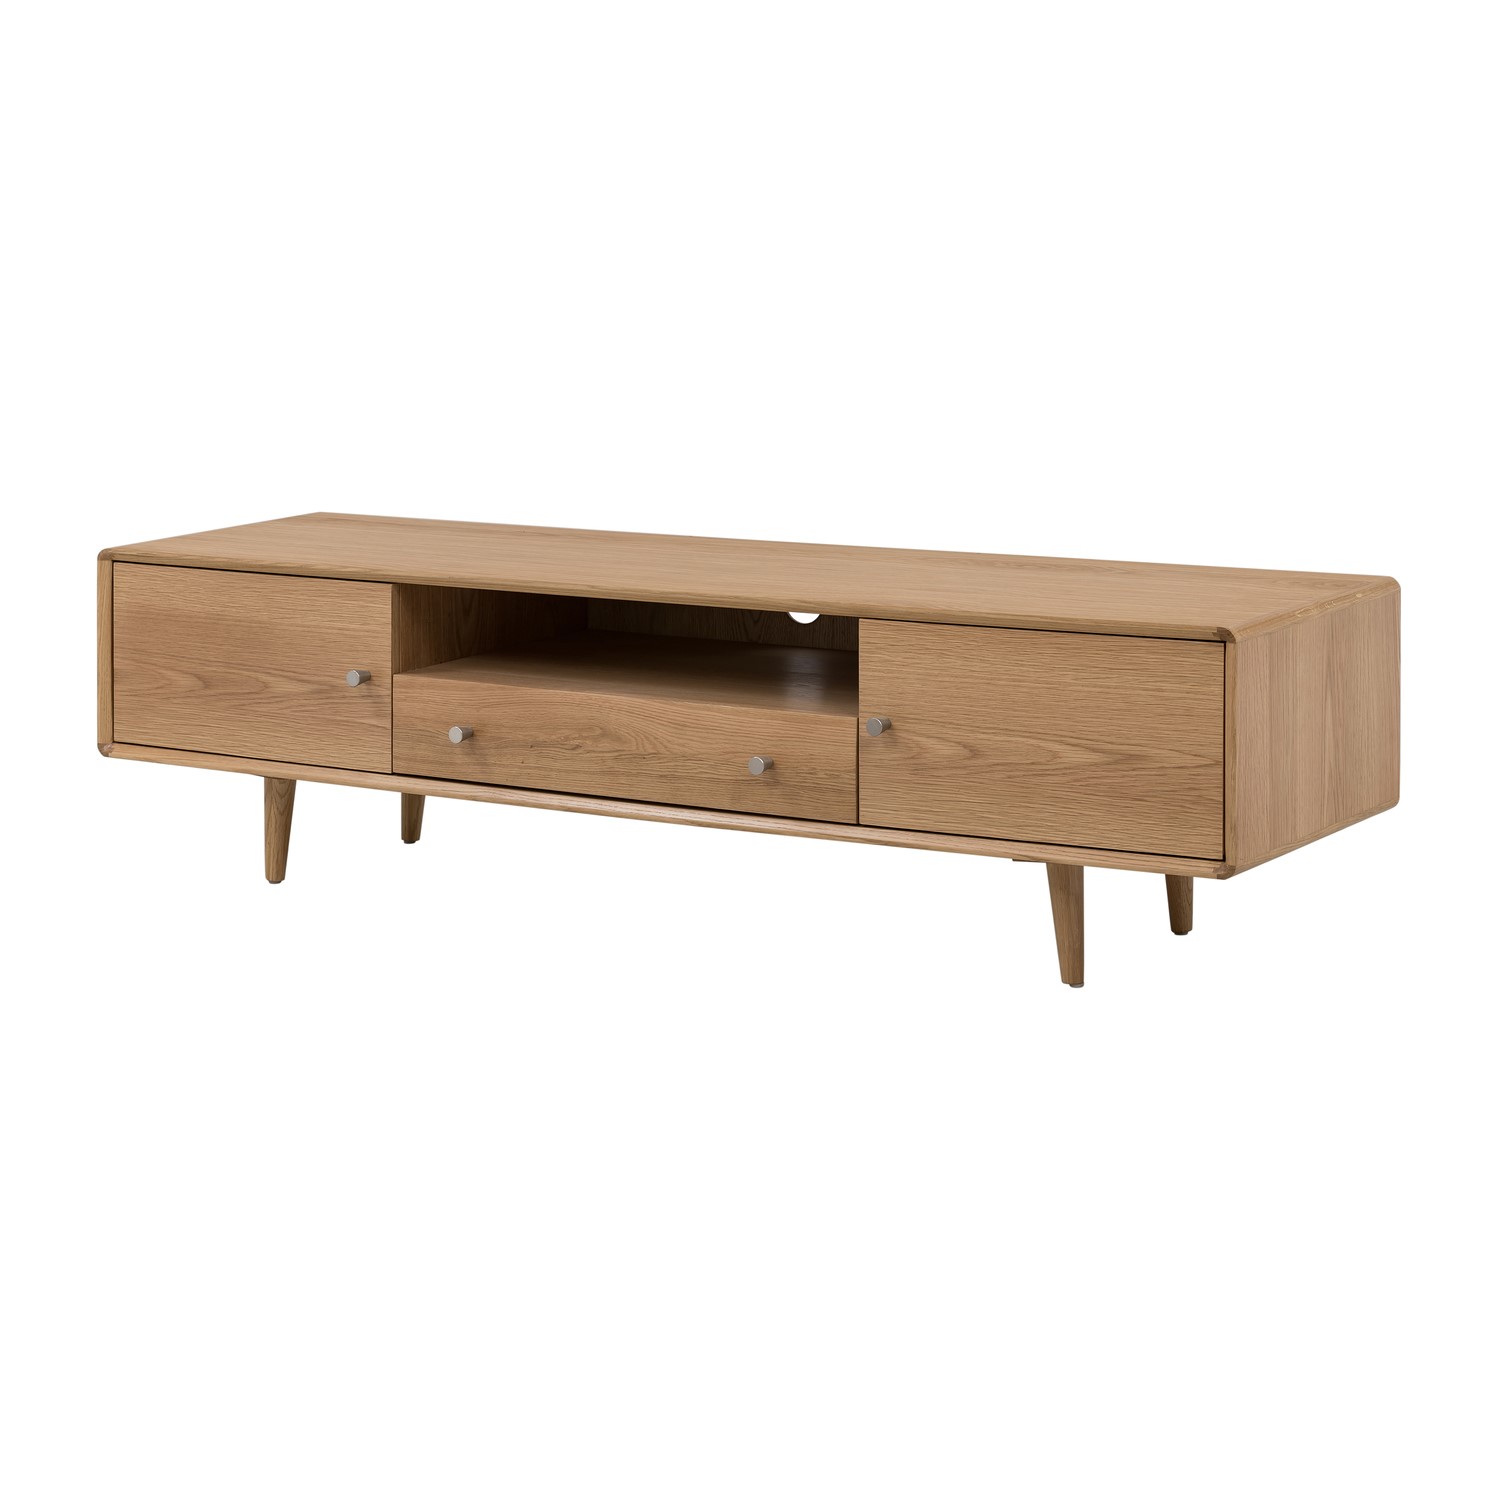 Read more about Large tv stand with storage in solid oak tvs up to 45 marny